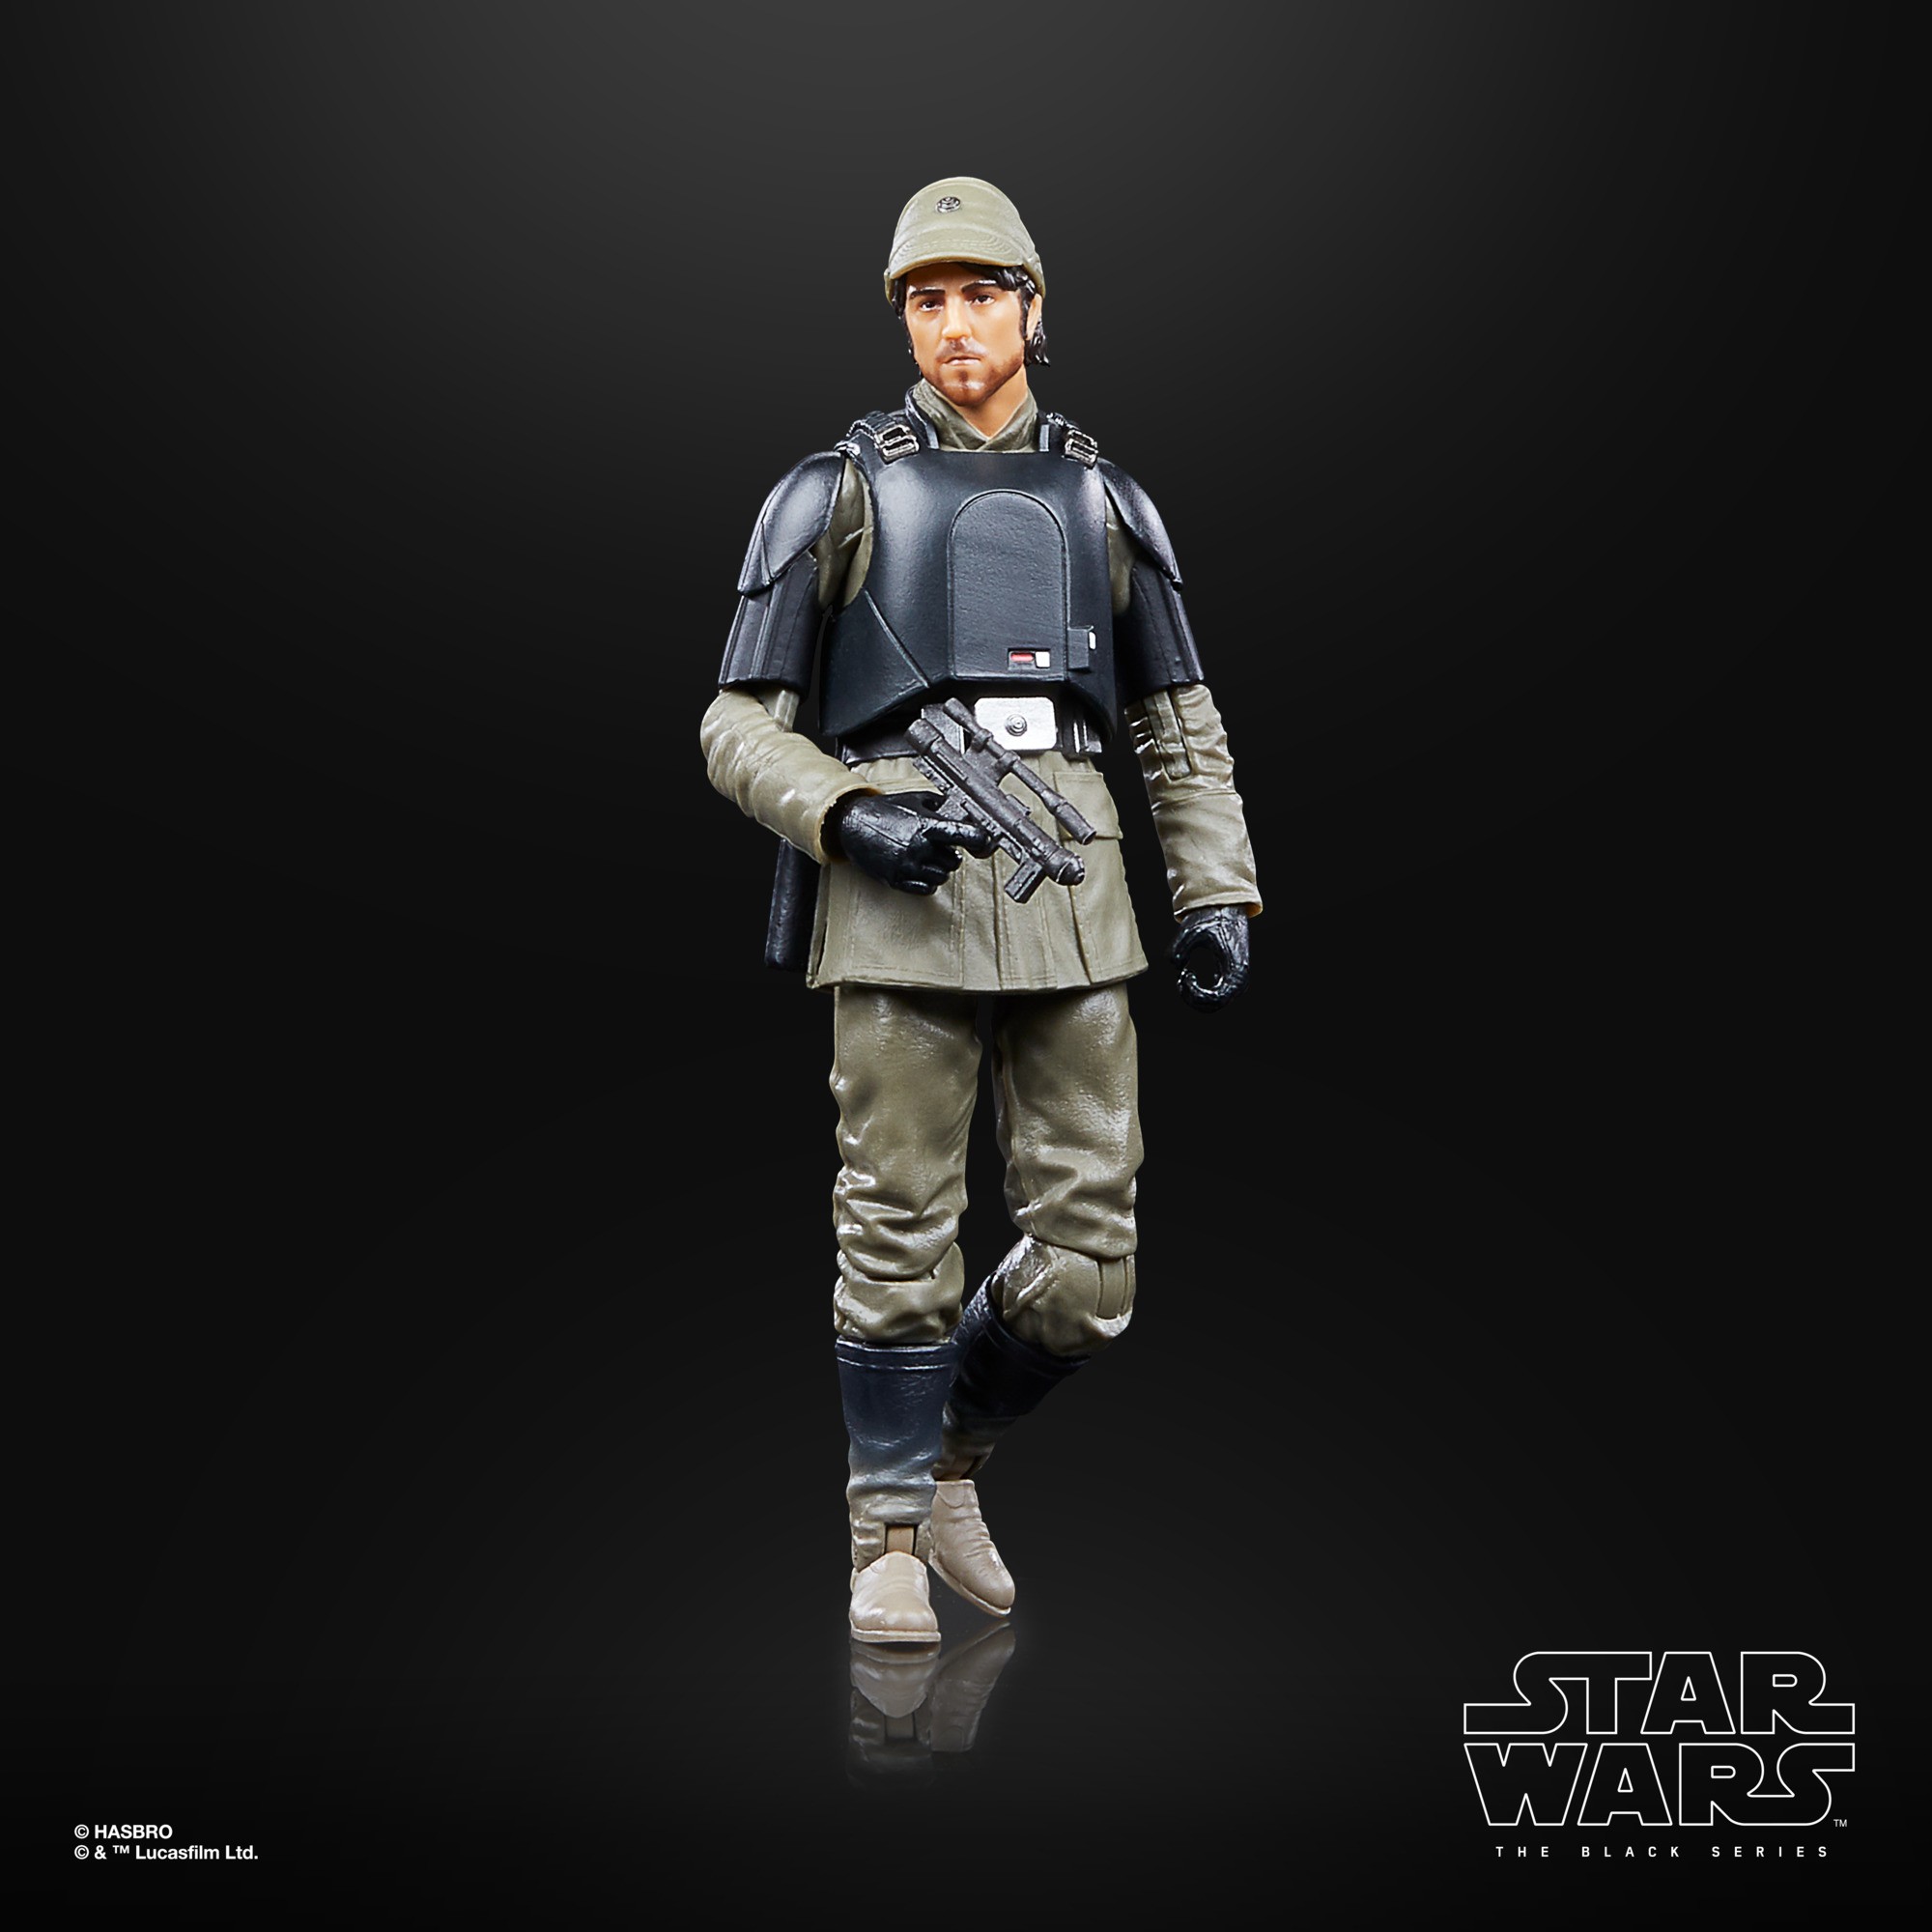 Star Wars: Andor Figures Revealed by Hasbro - IGN